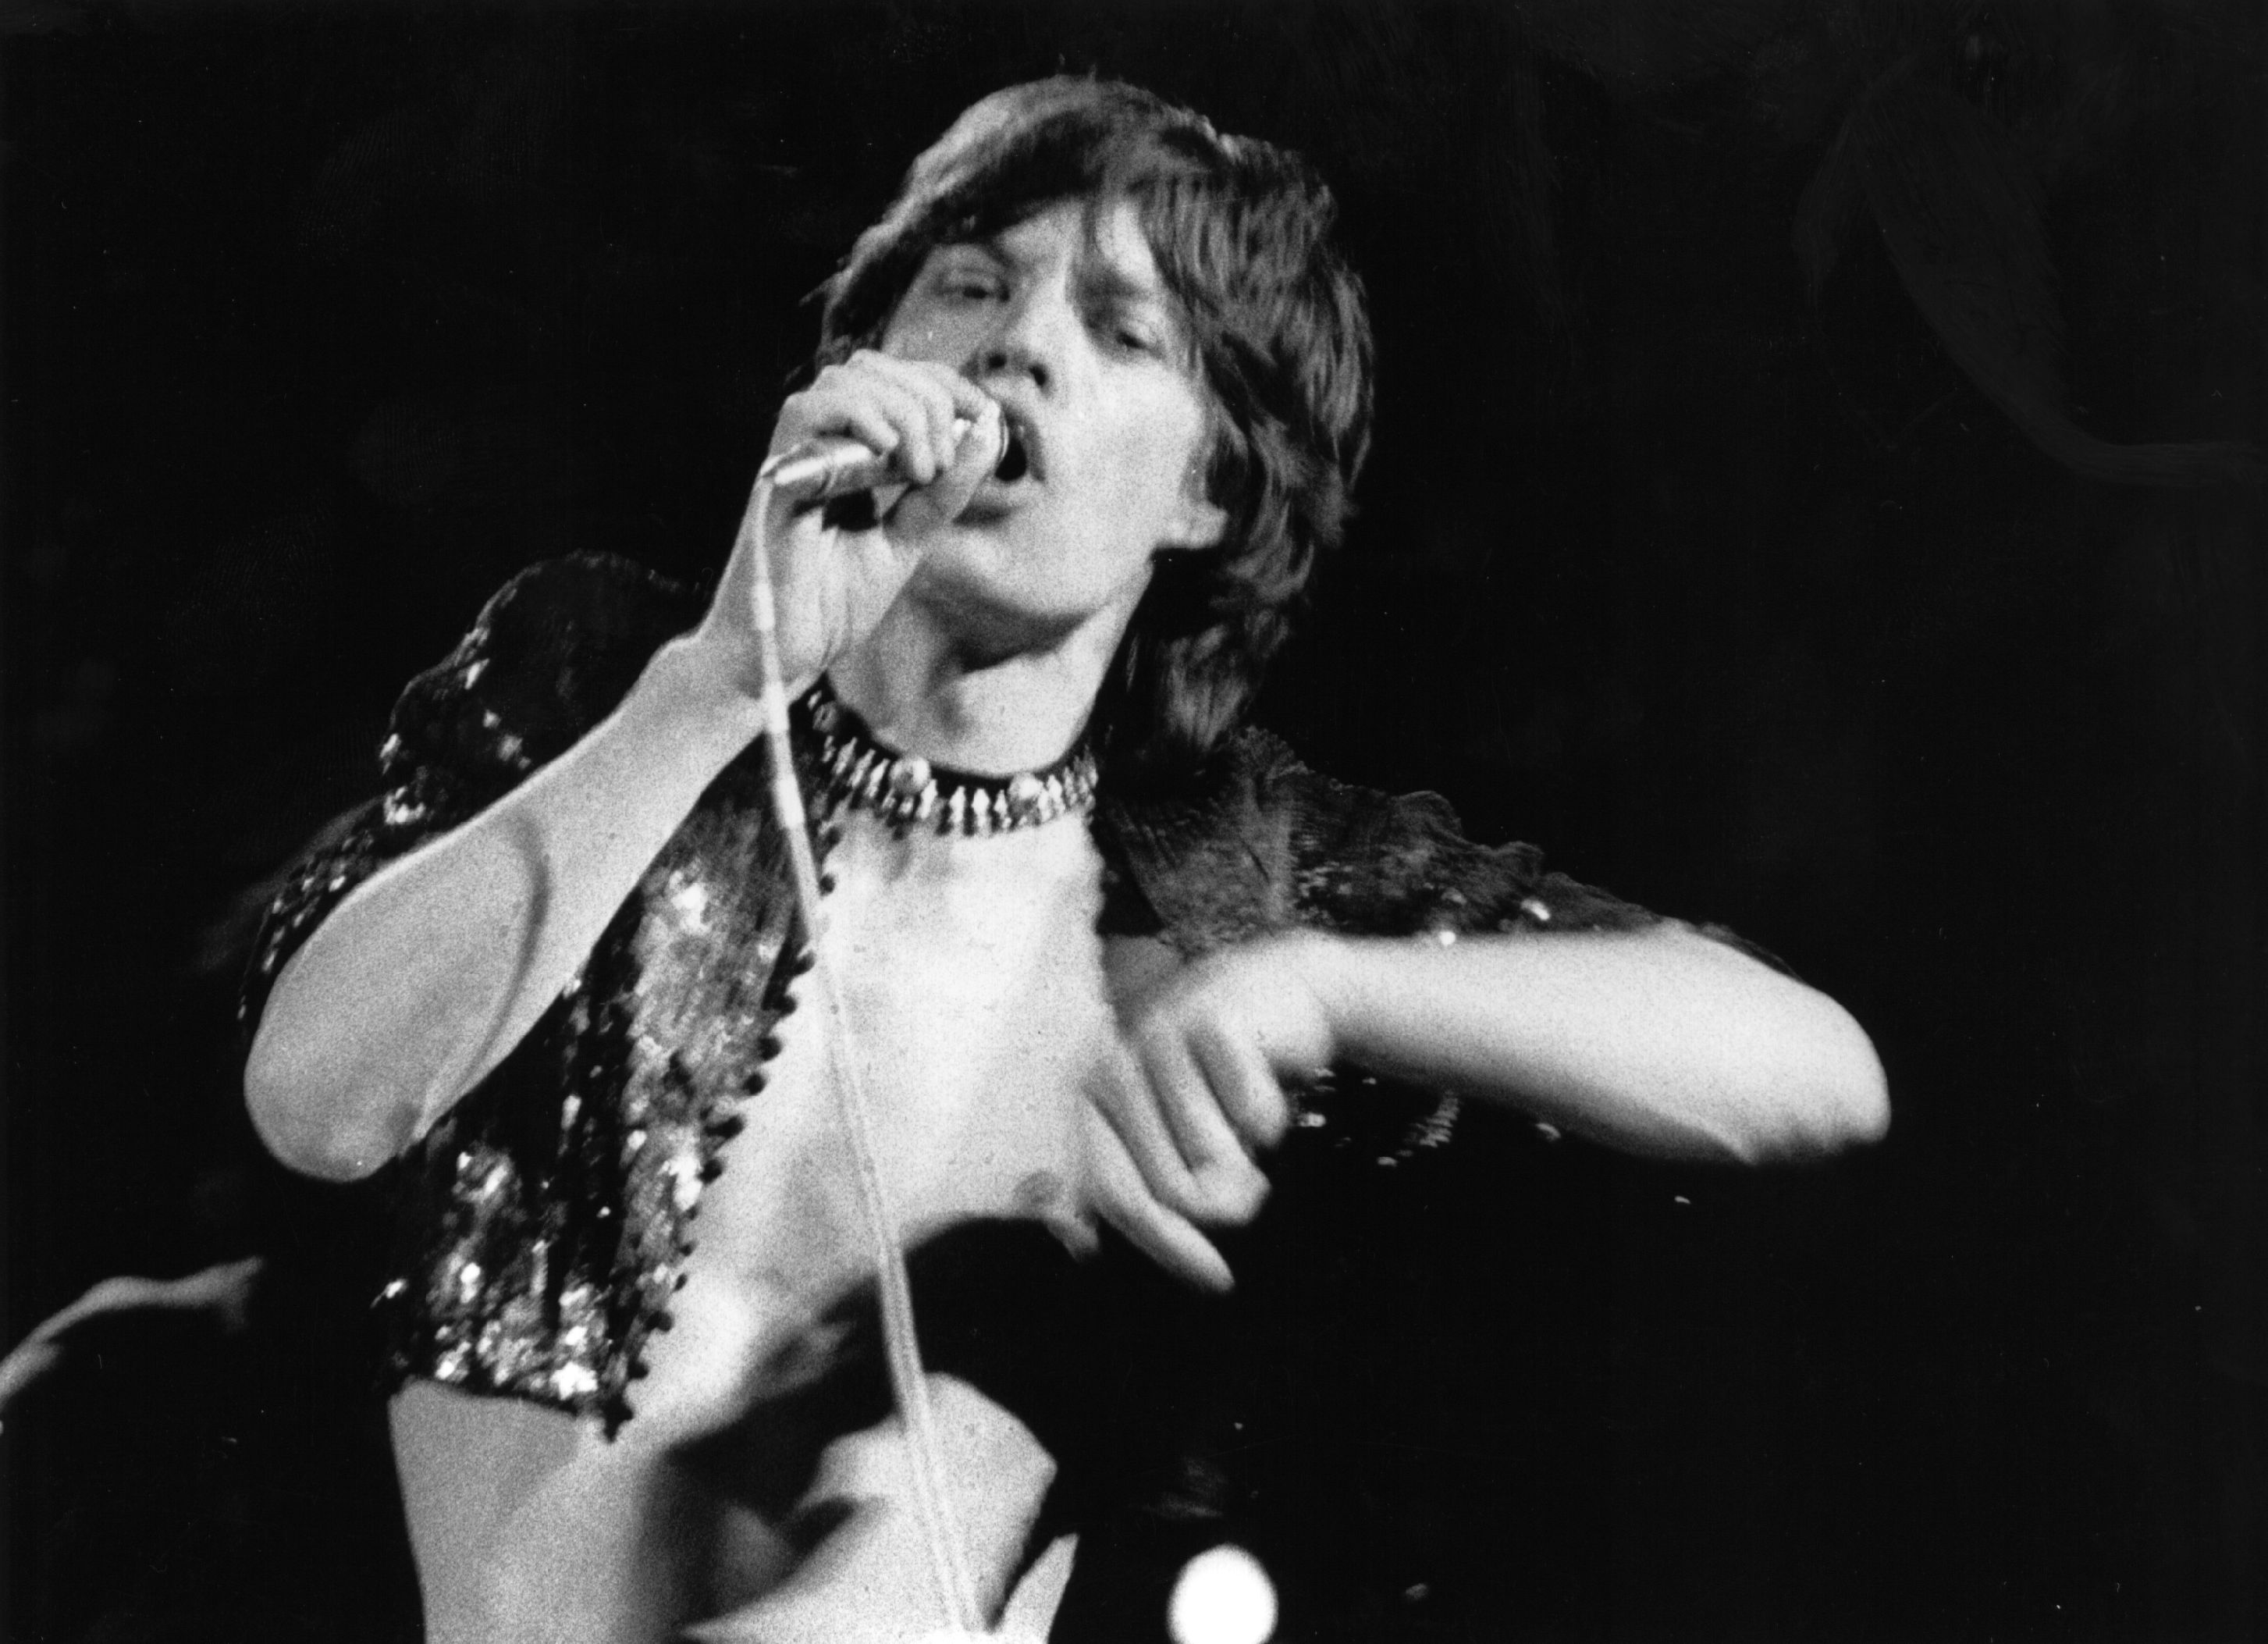 A Drummer Said The Rolling Stones’ ‘Honky Tonk Women’ Has the Band’s ‘Seismic Moment’